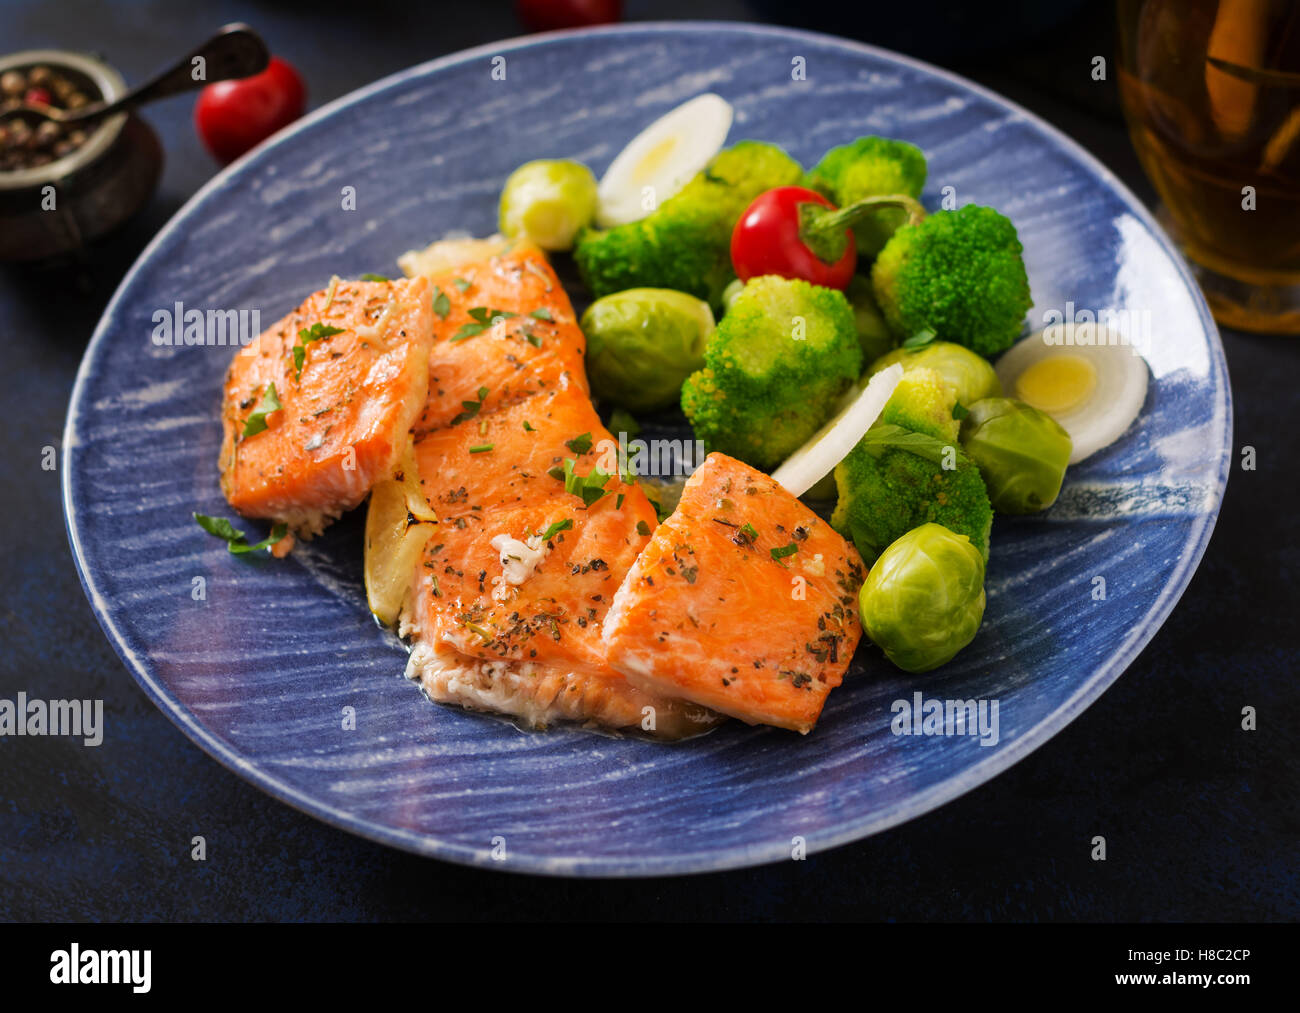 Baked salmon fish garnished with broccoli and Brussels sprouts with ...